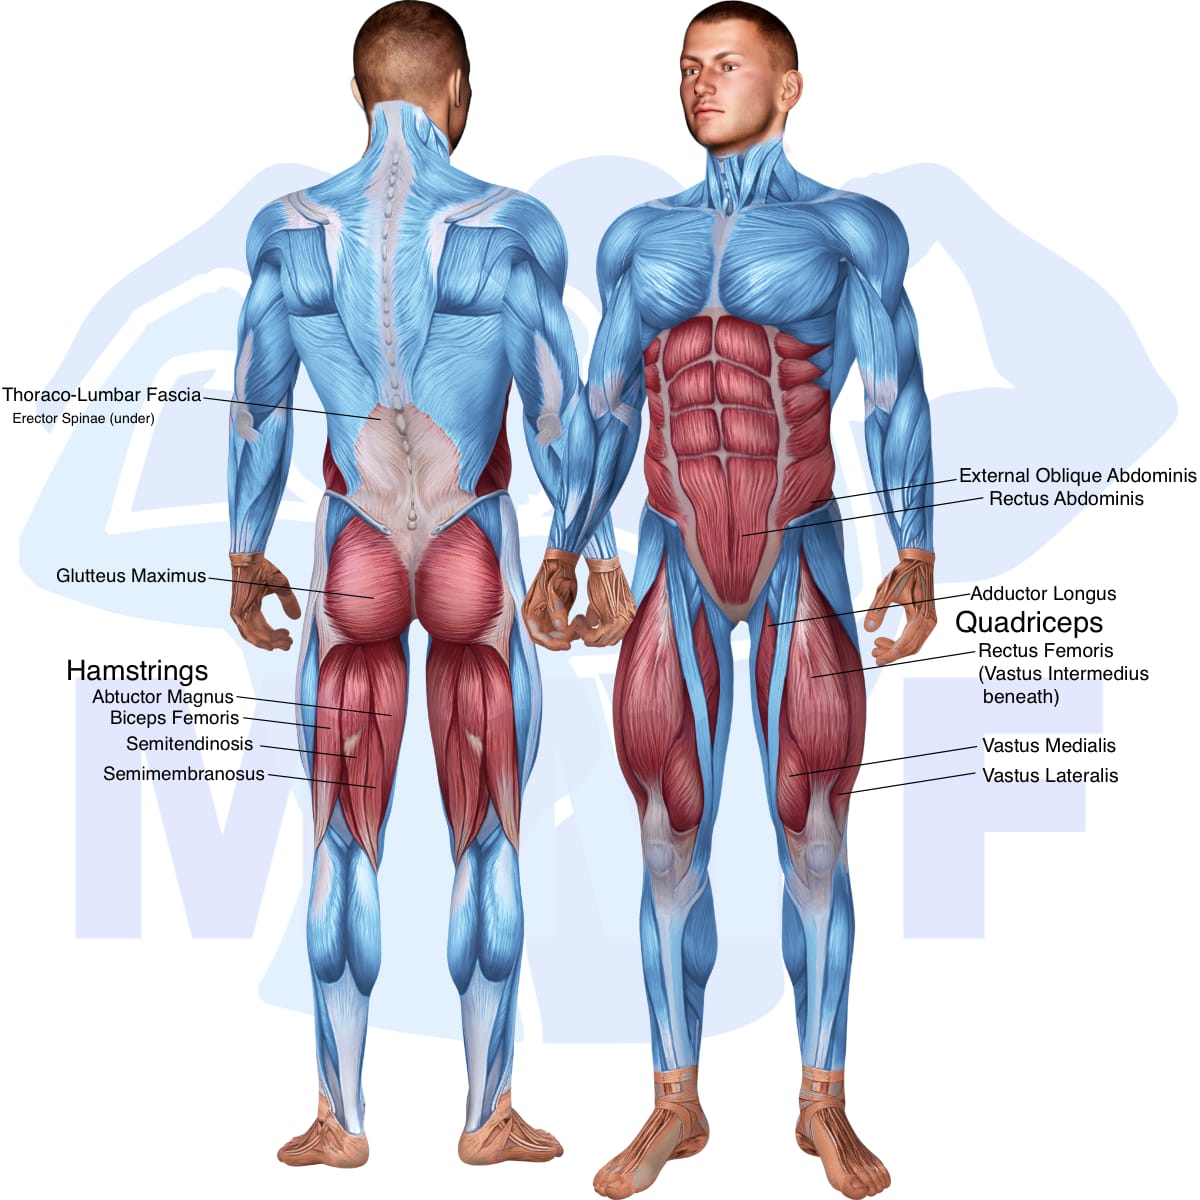 Image of the skeletal muscular system with the muscles used in the smith bent knee good morning exercise highlighted in red and the rest in blue.